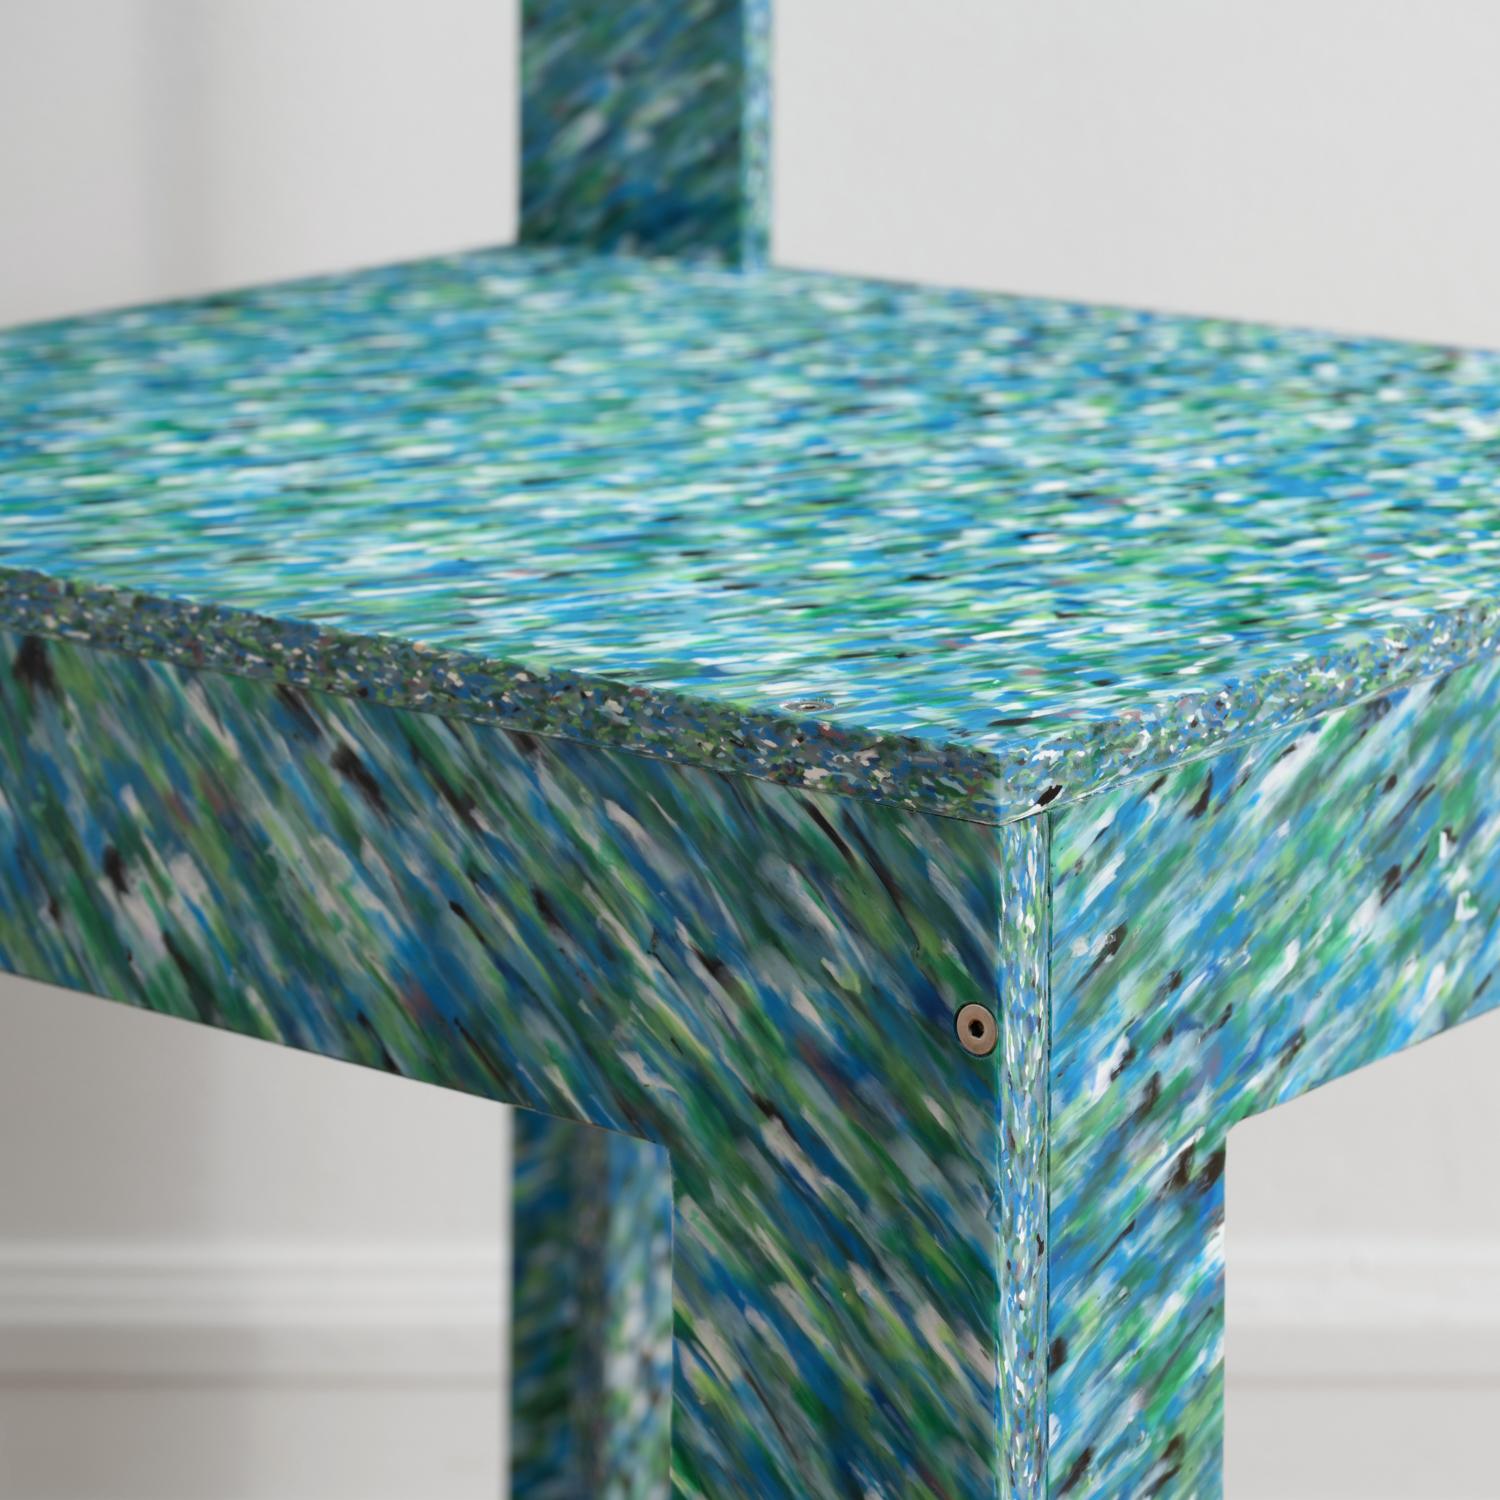 This is the 2022 re-issue of British-designer Jane Atfield's historical, 'RCP2 Chair', an iconic example of sustainable design, to commemorate the 30th anniversary of the piece, which was originally designed between 1990-1992. This series of